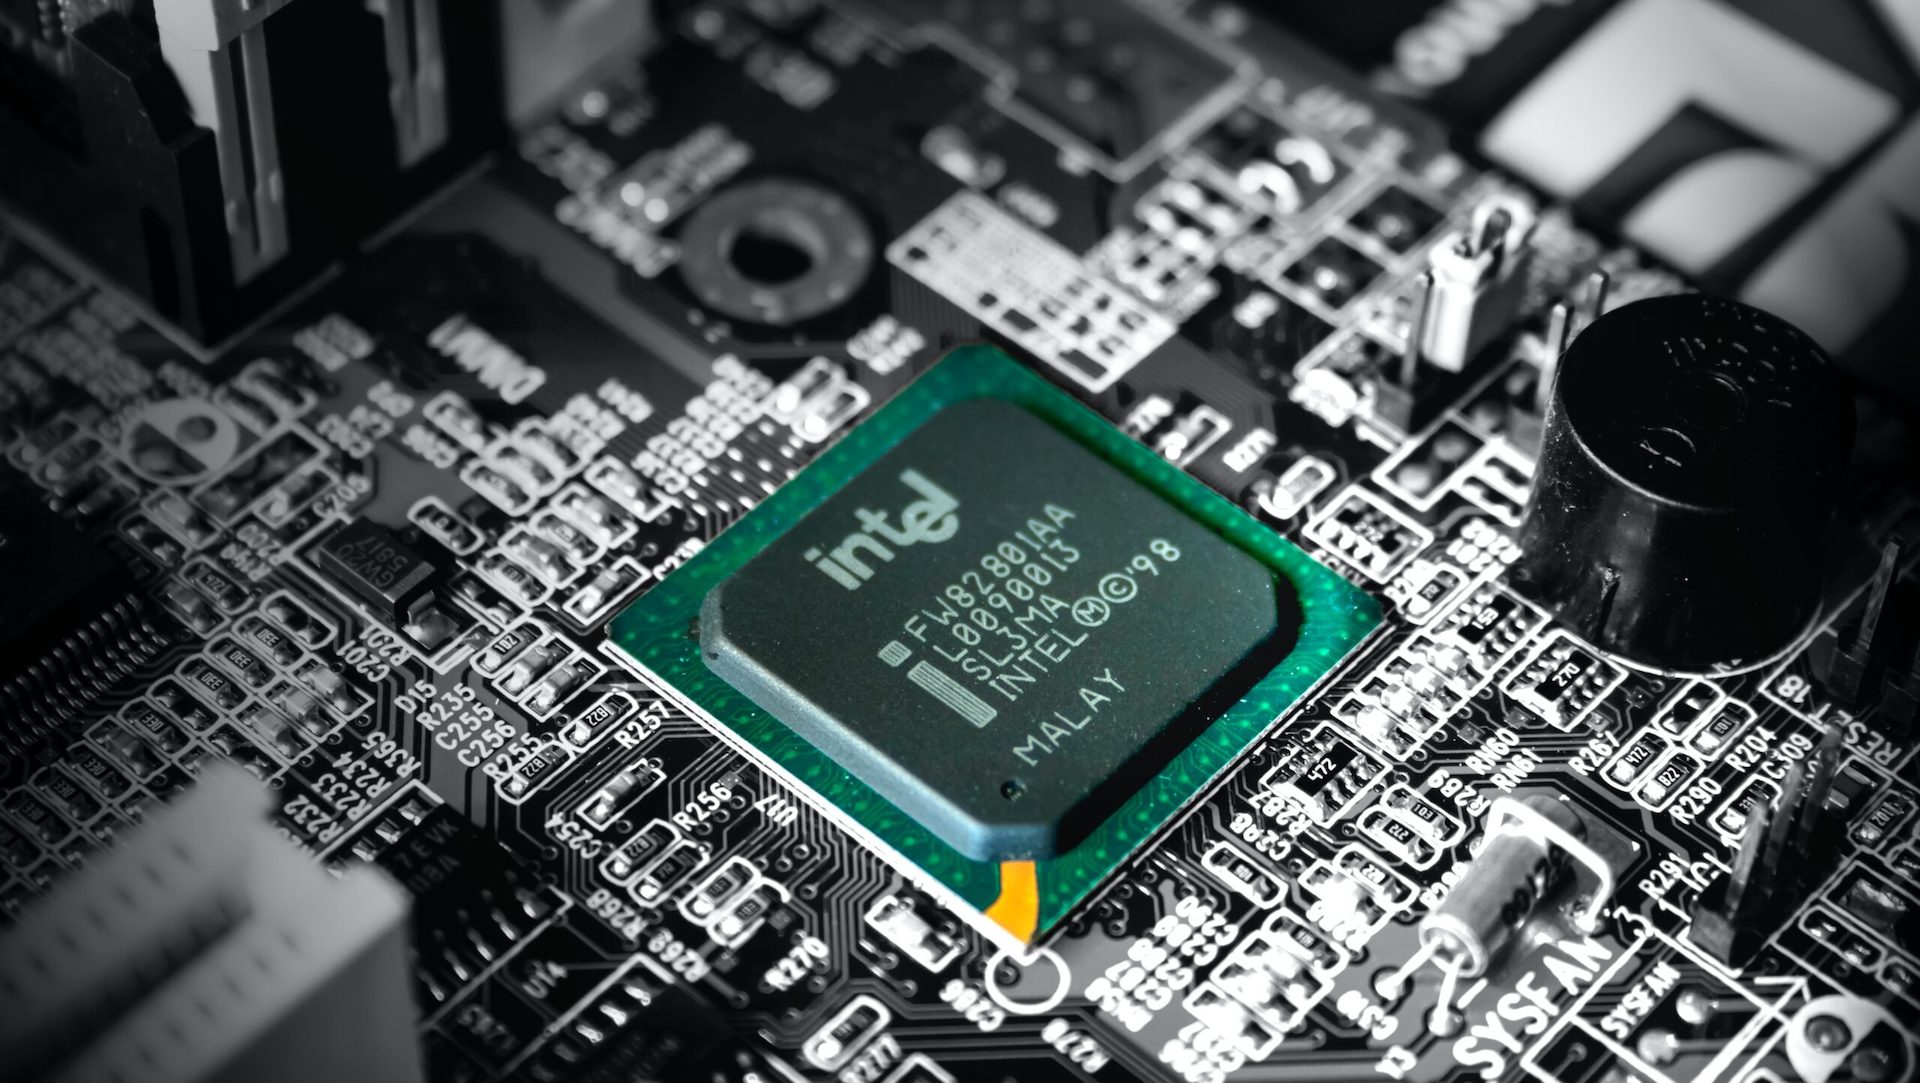 A chip to mine bitcoin in a greener way: has Intel found the Holy Grail of crypto? thumbnail